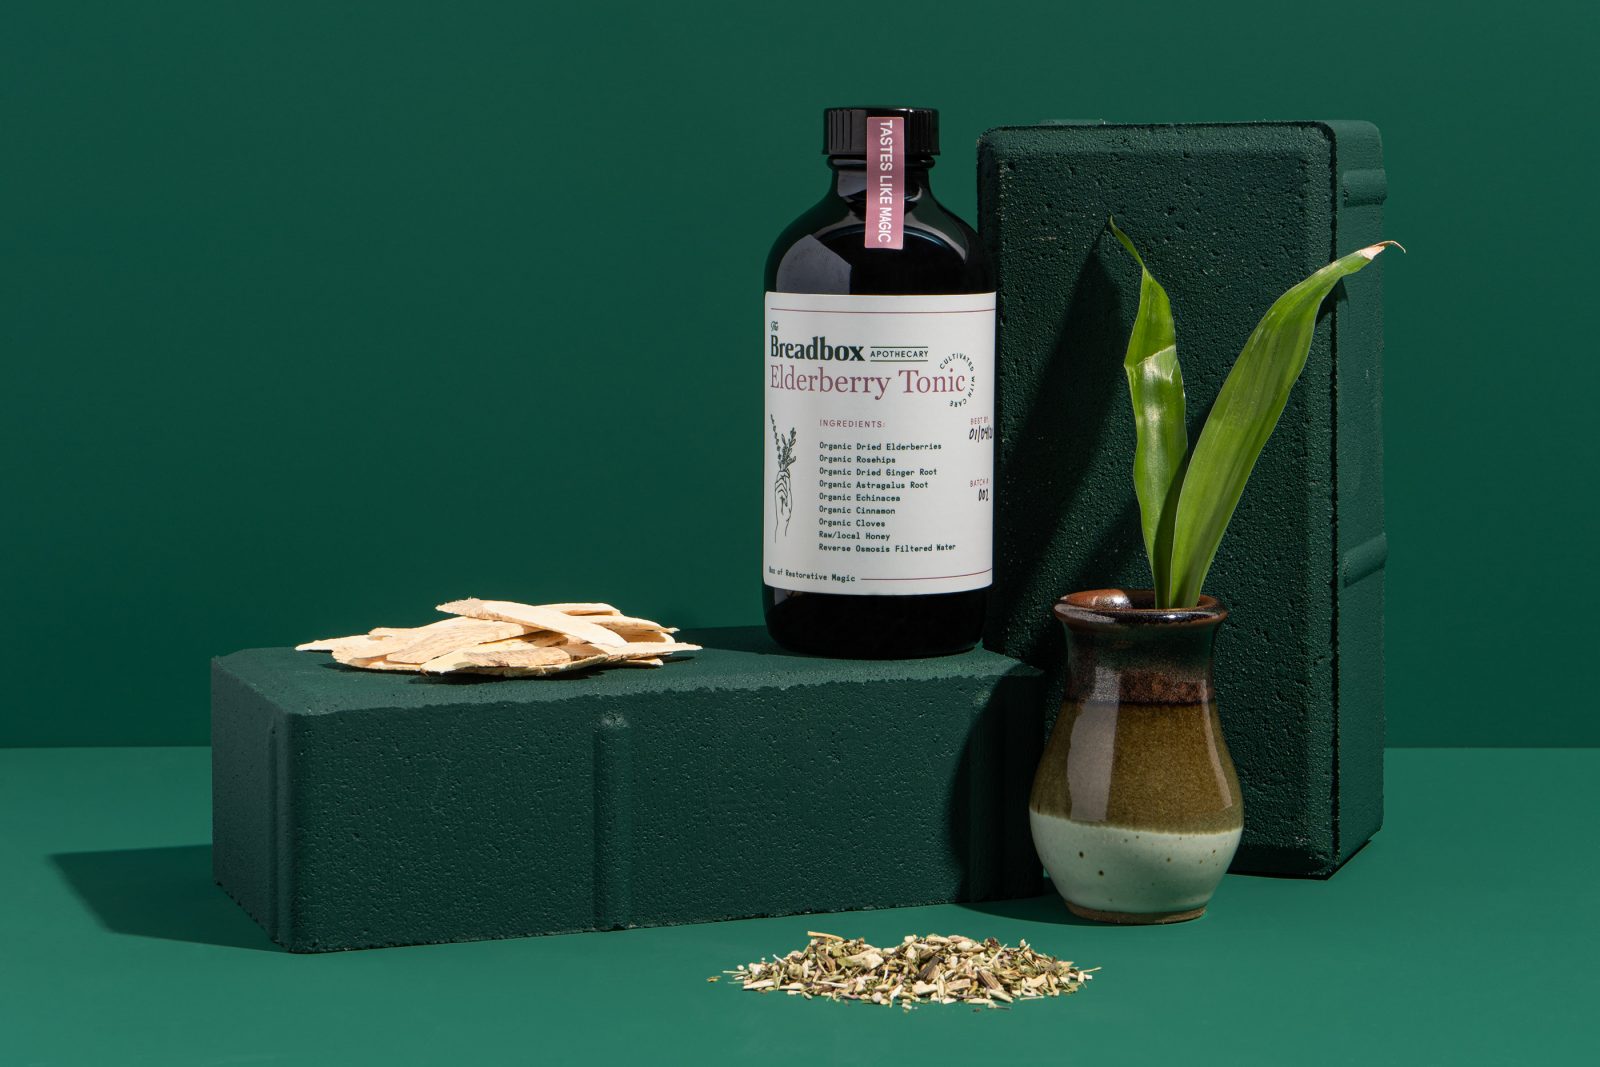 The Breadbox Apothecary Brand Identity by Hype Group